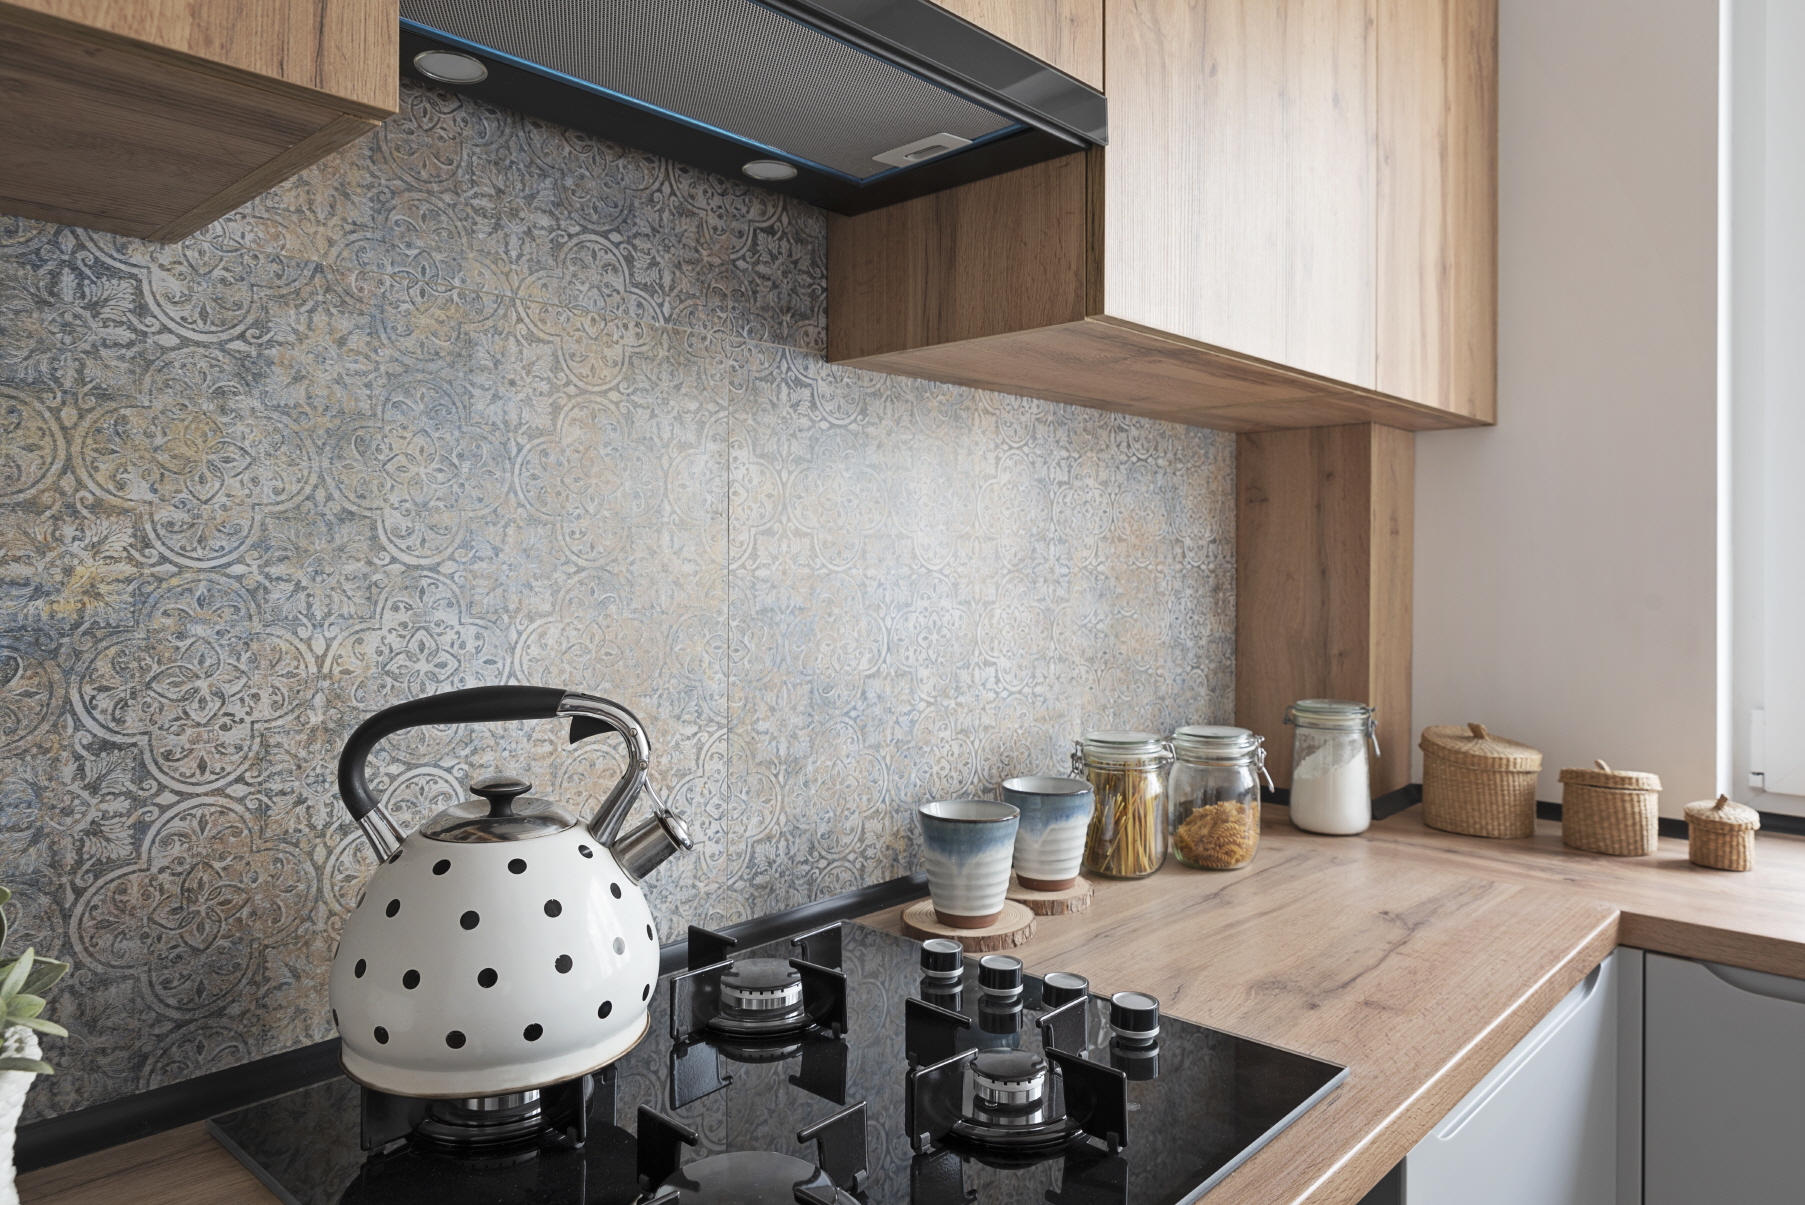 LX Hausys materials add dynamic geometric designs to kitchens, fostering creativity in a harmonious space.